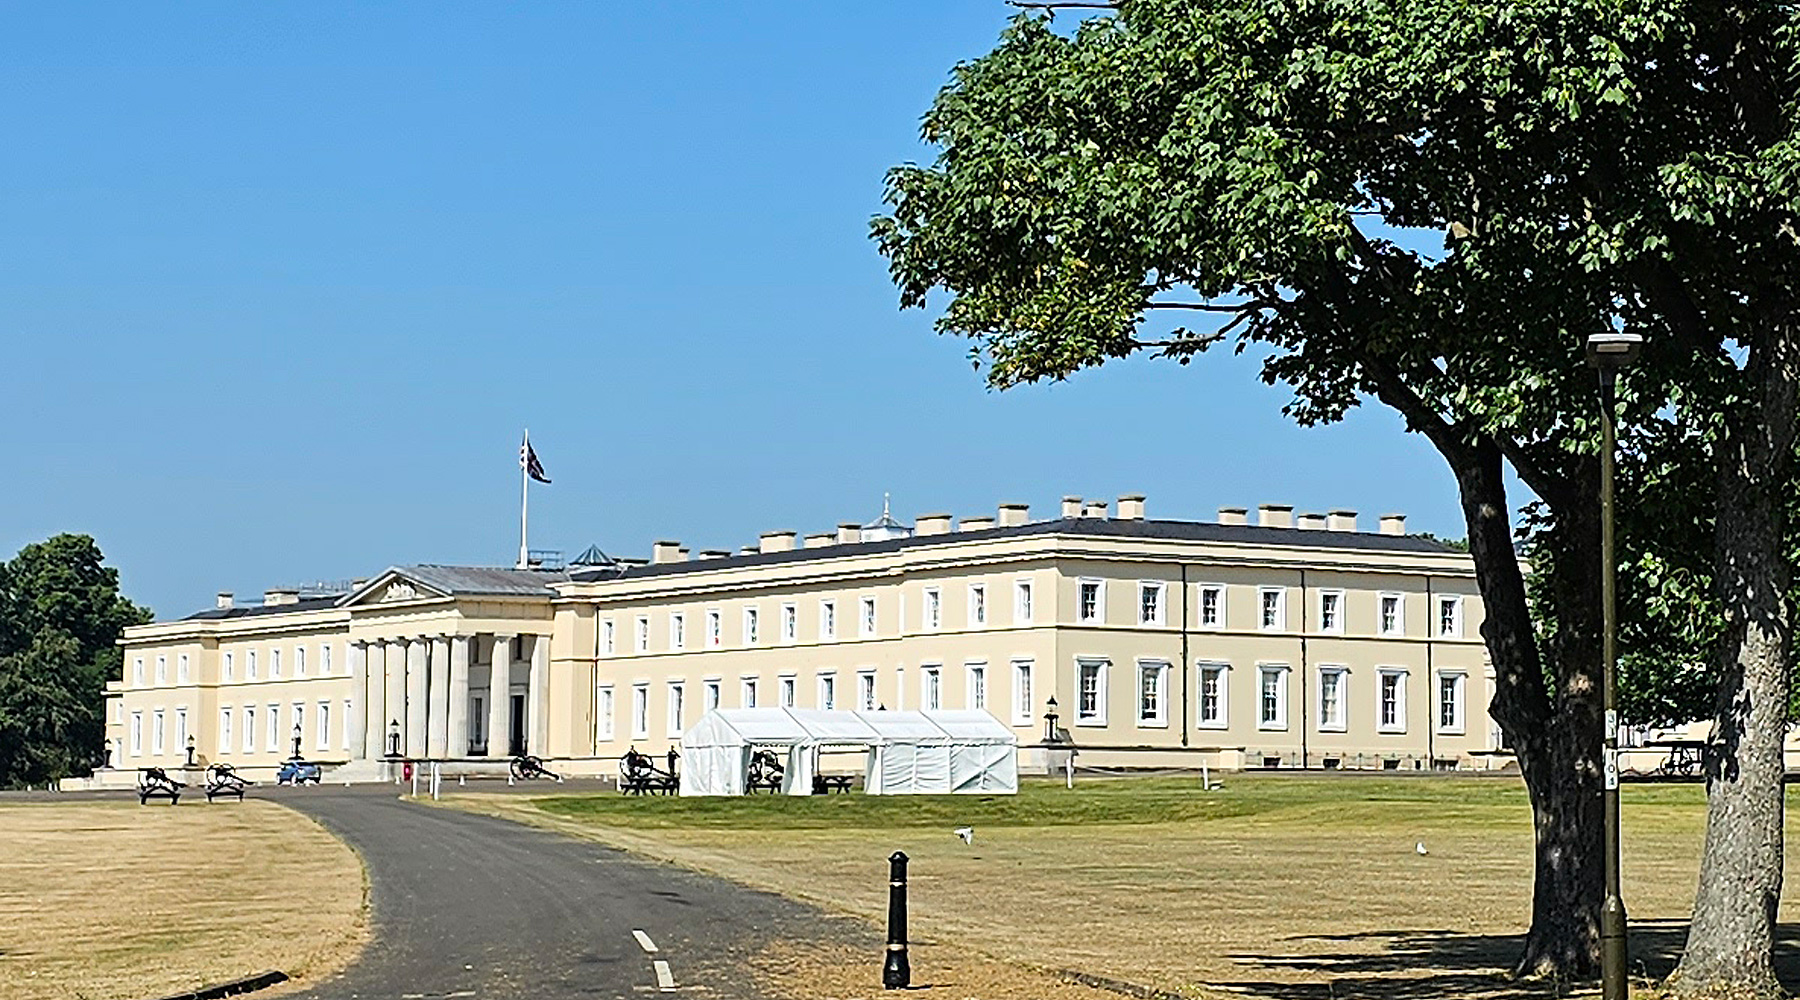 The Royal Military Academy Sandhurst is offering public tours of their historic buildings